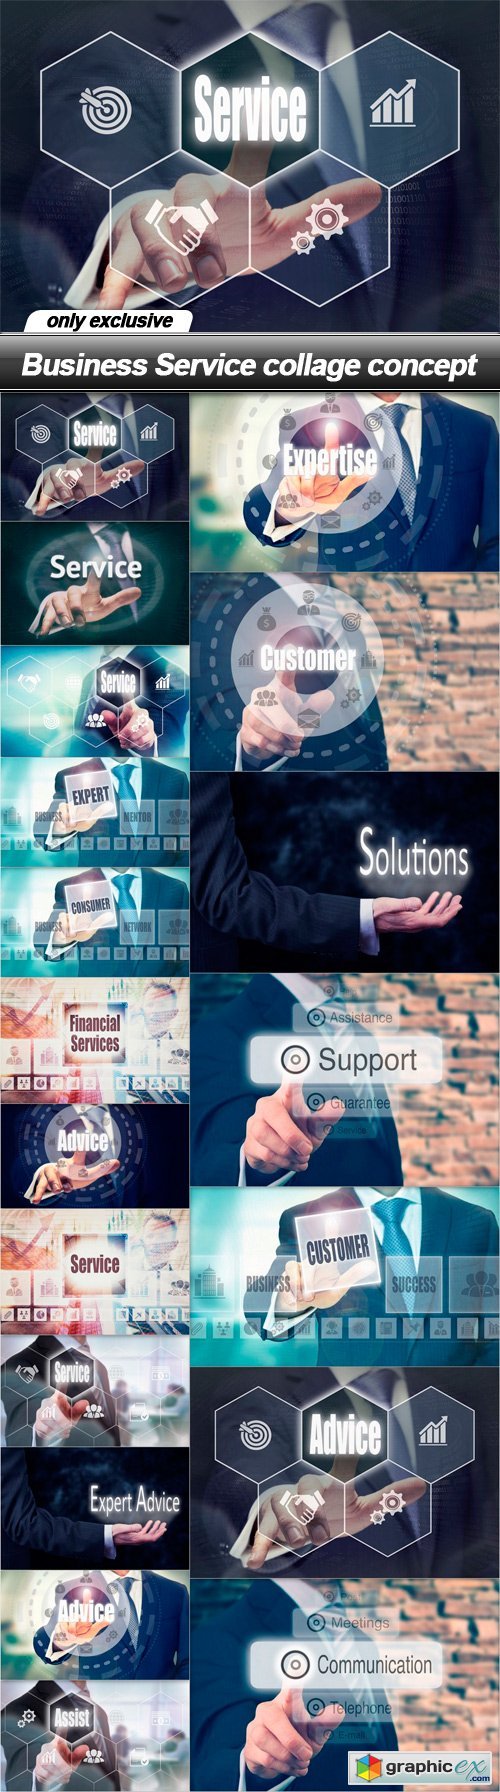 Business Service collage concept - 19 UHQ JPEG